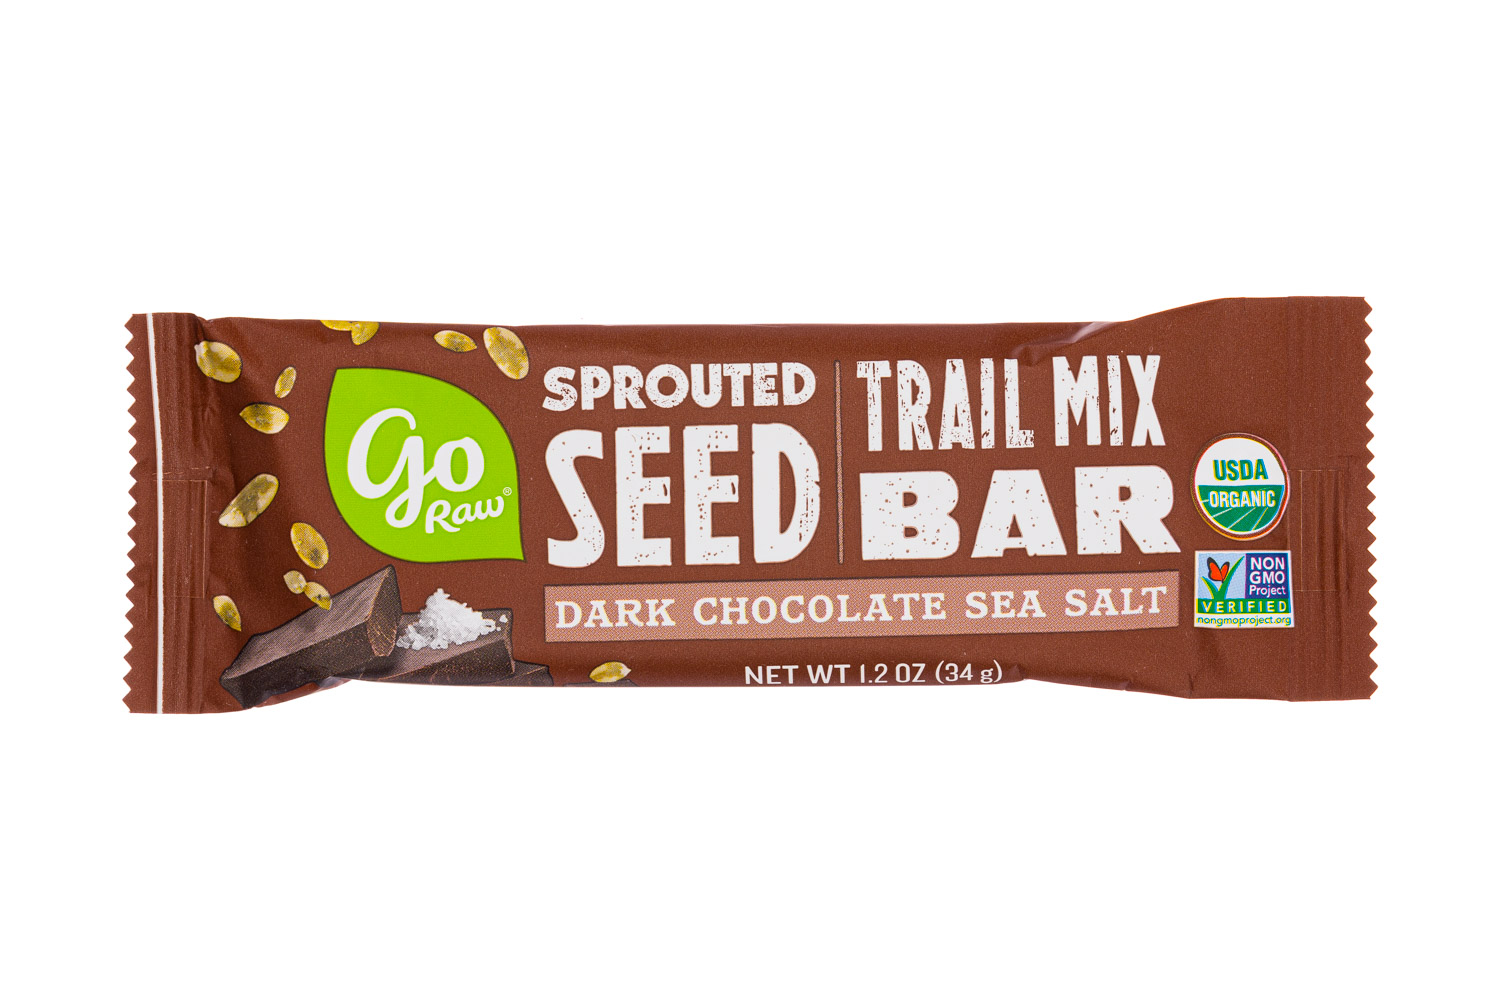 Sprouted Seed Trail Mix Bar - Dark Chocolate Sea Salt